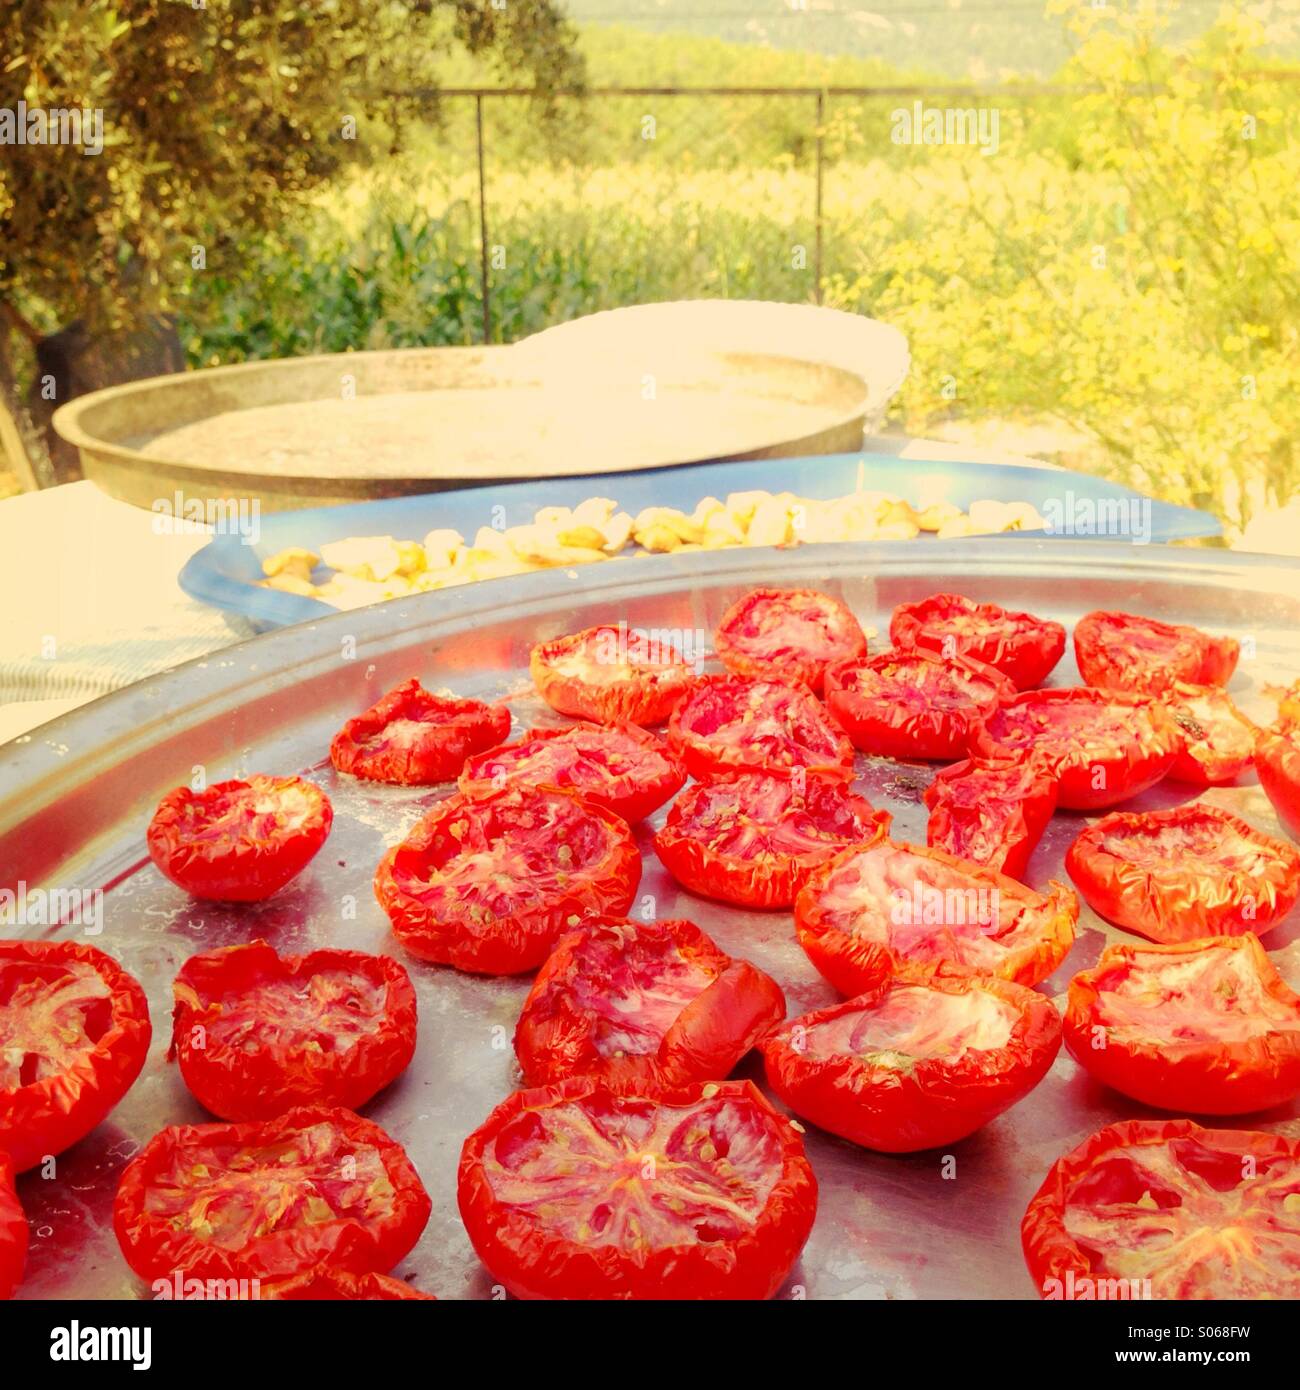 Tomatoes and apples drying in the sun Stock Photo